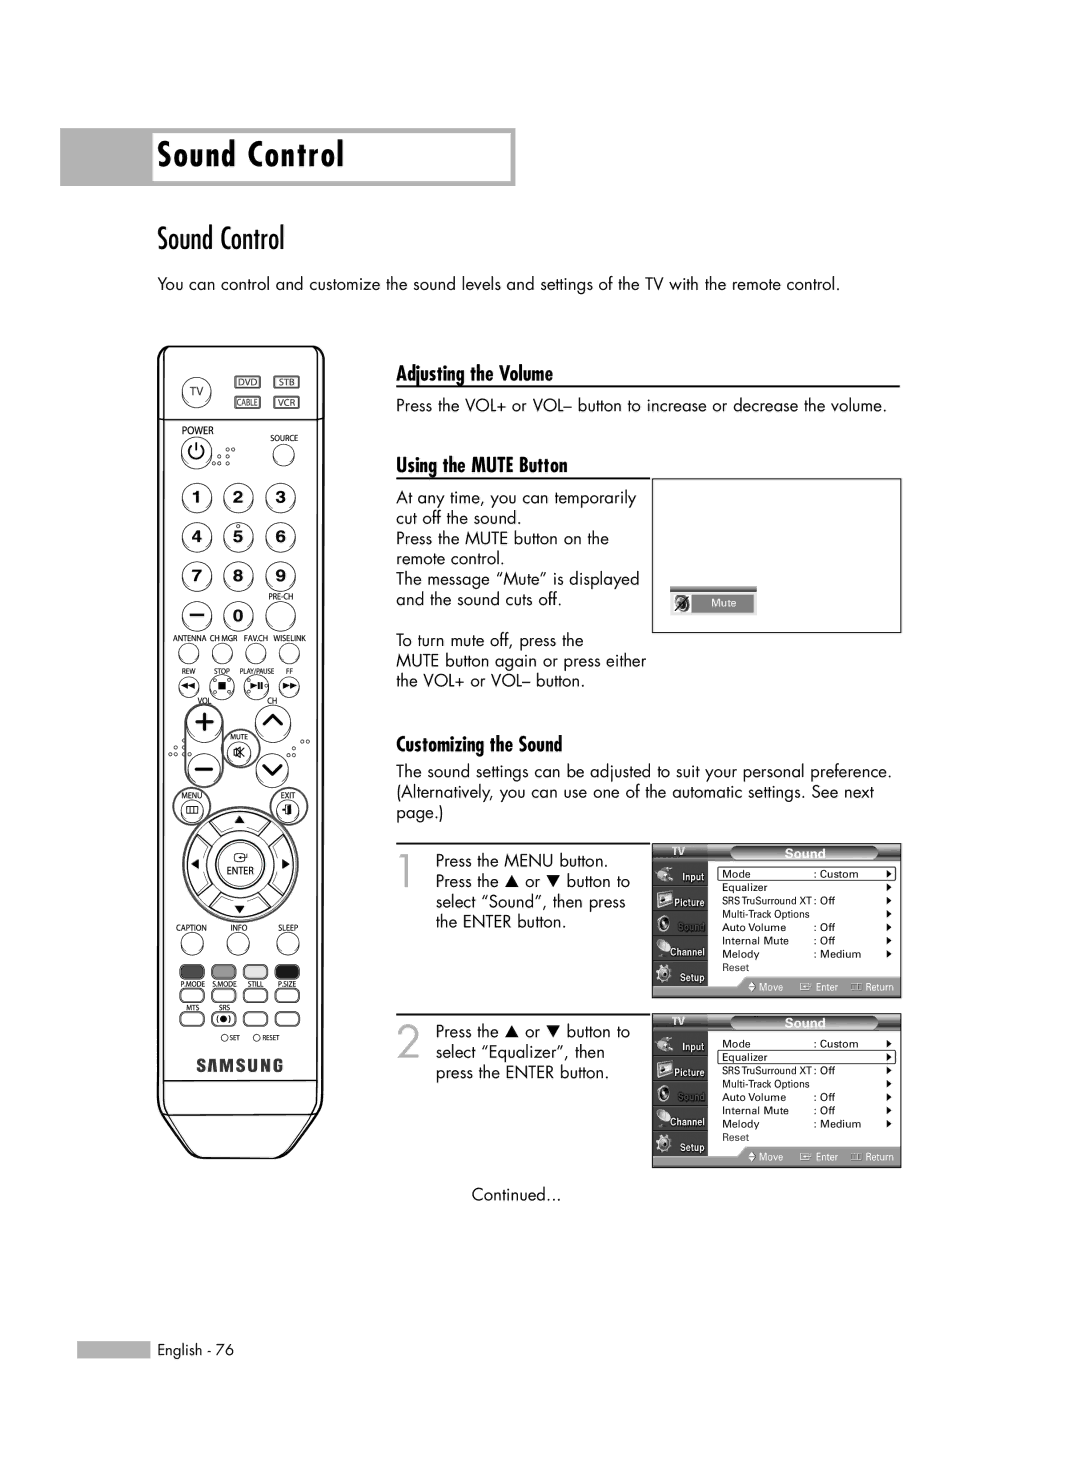 Samsung HL-S4676S manual Sound Control, Adjusting the Volume, Using the Mute Button, Customizing the Sound 